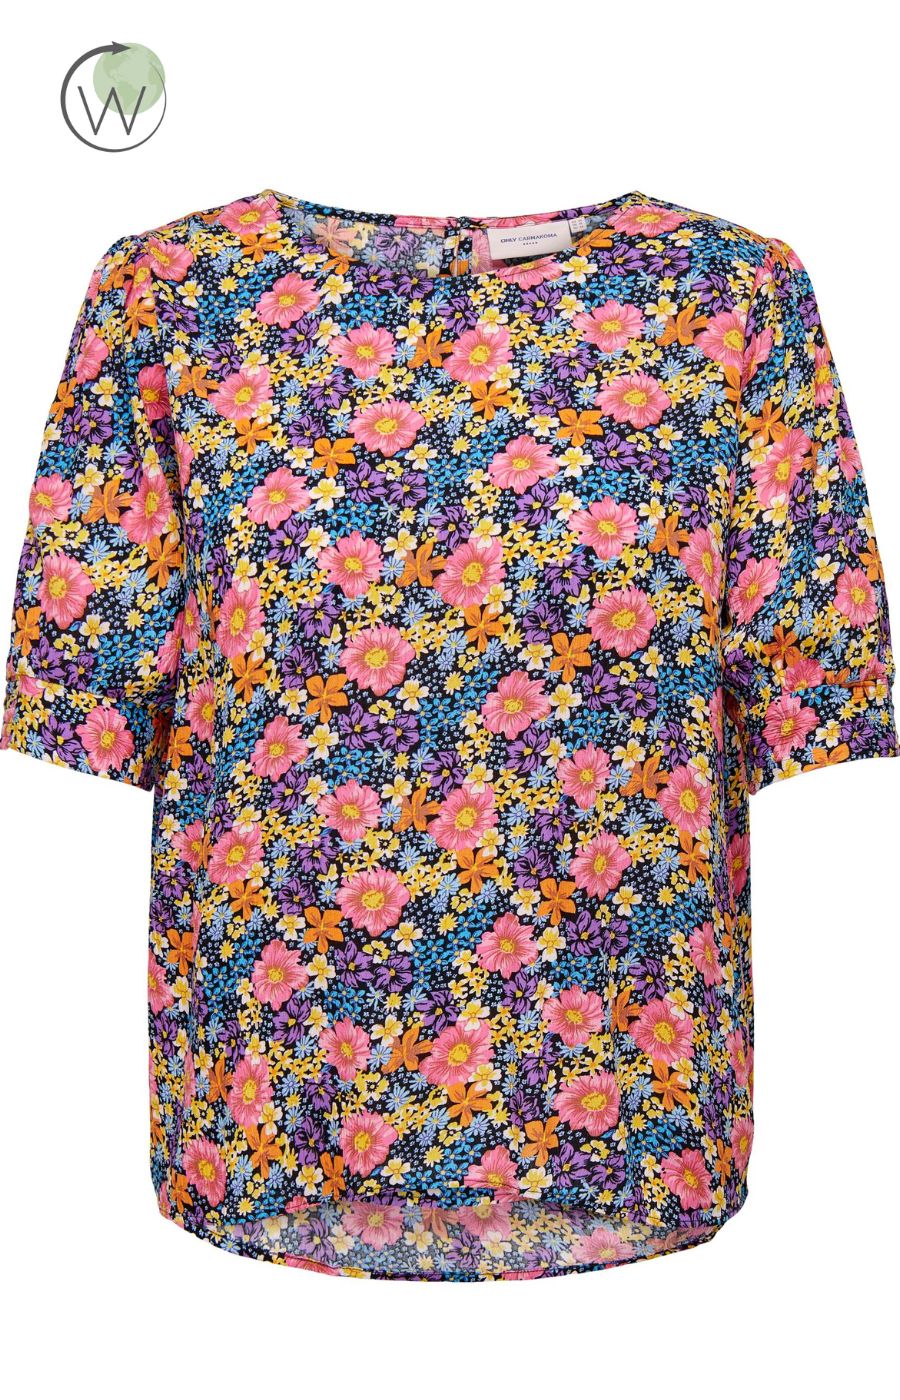 Only Carmakoma Katja Top in Floral